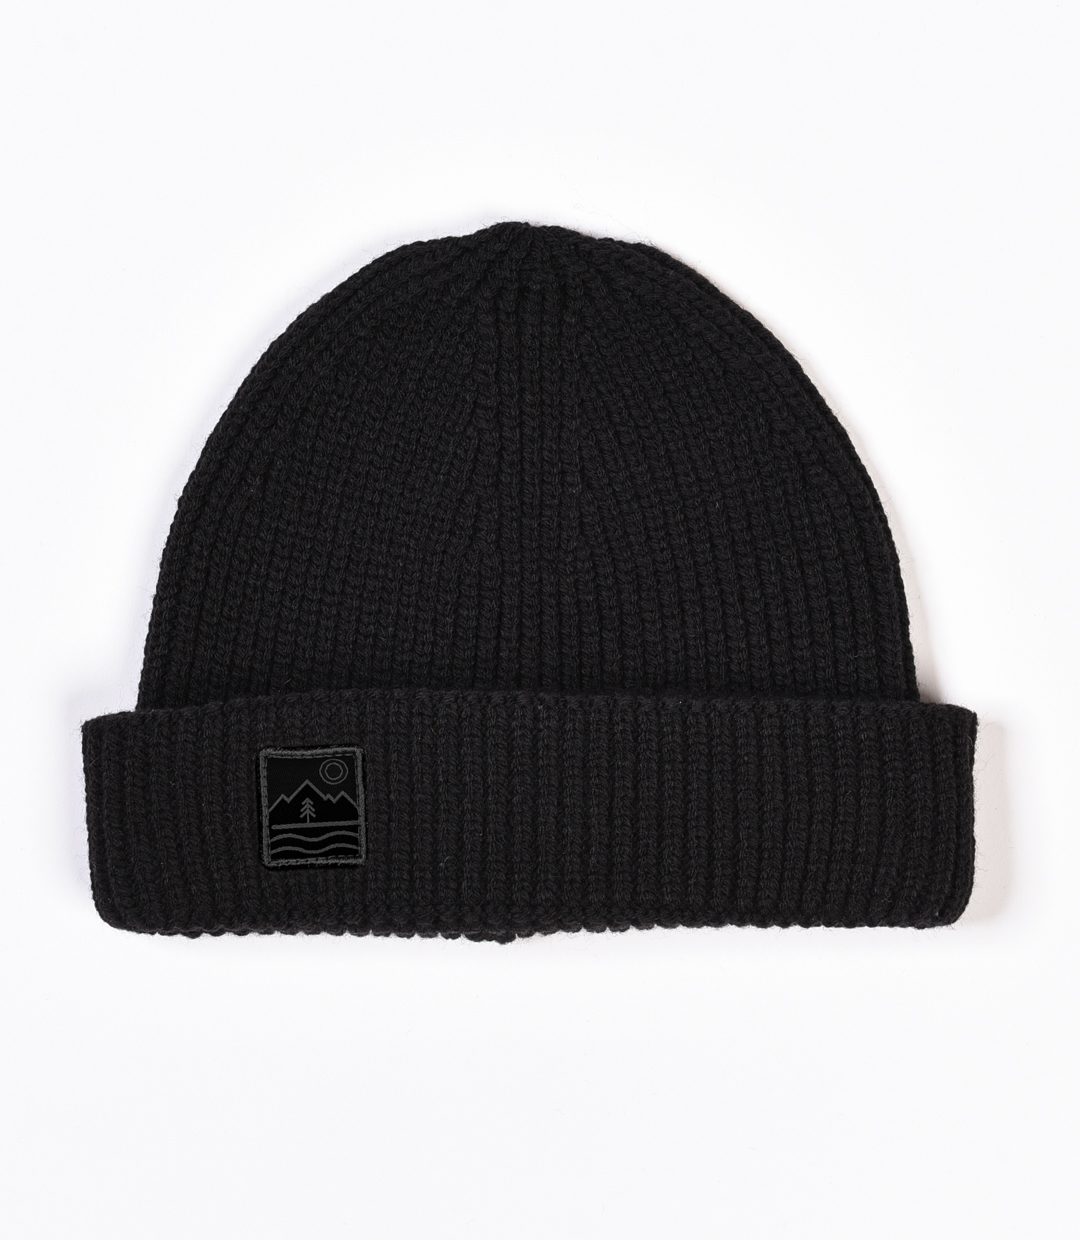 Whatever Man Harbour Beanie MTN Patch 1 1